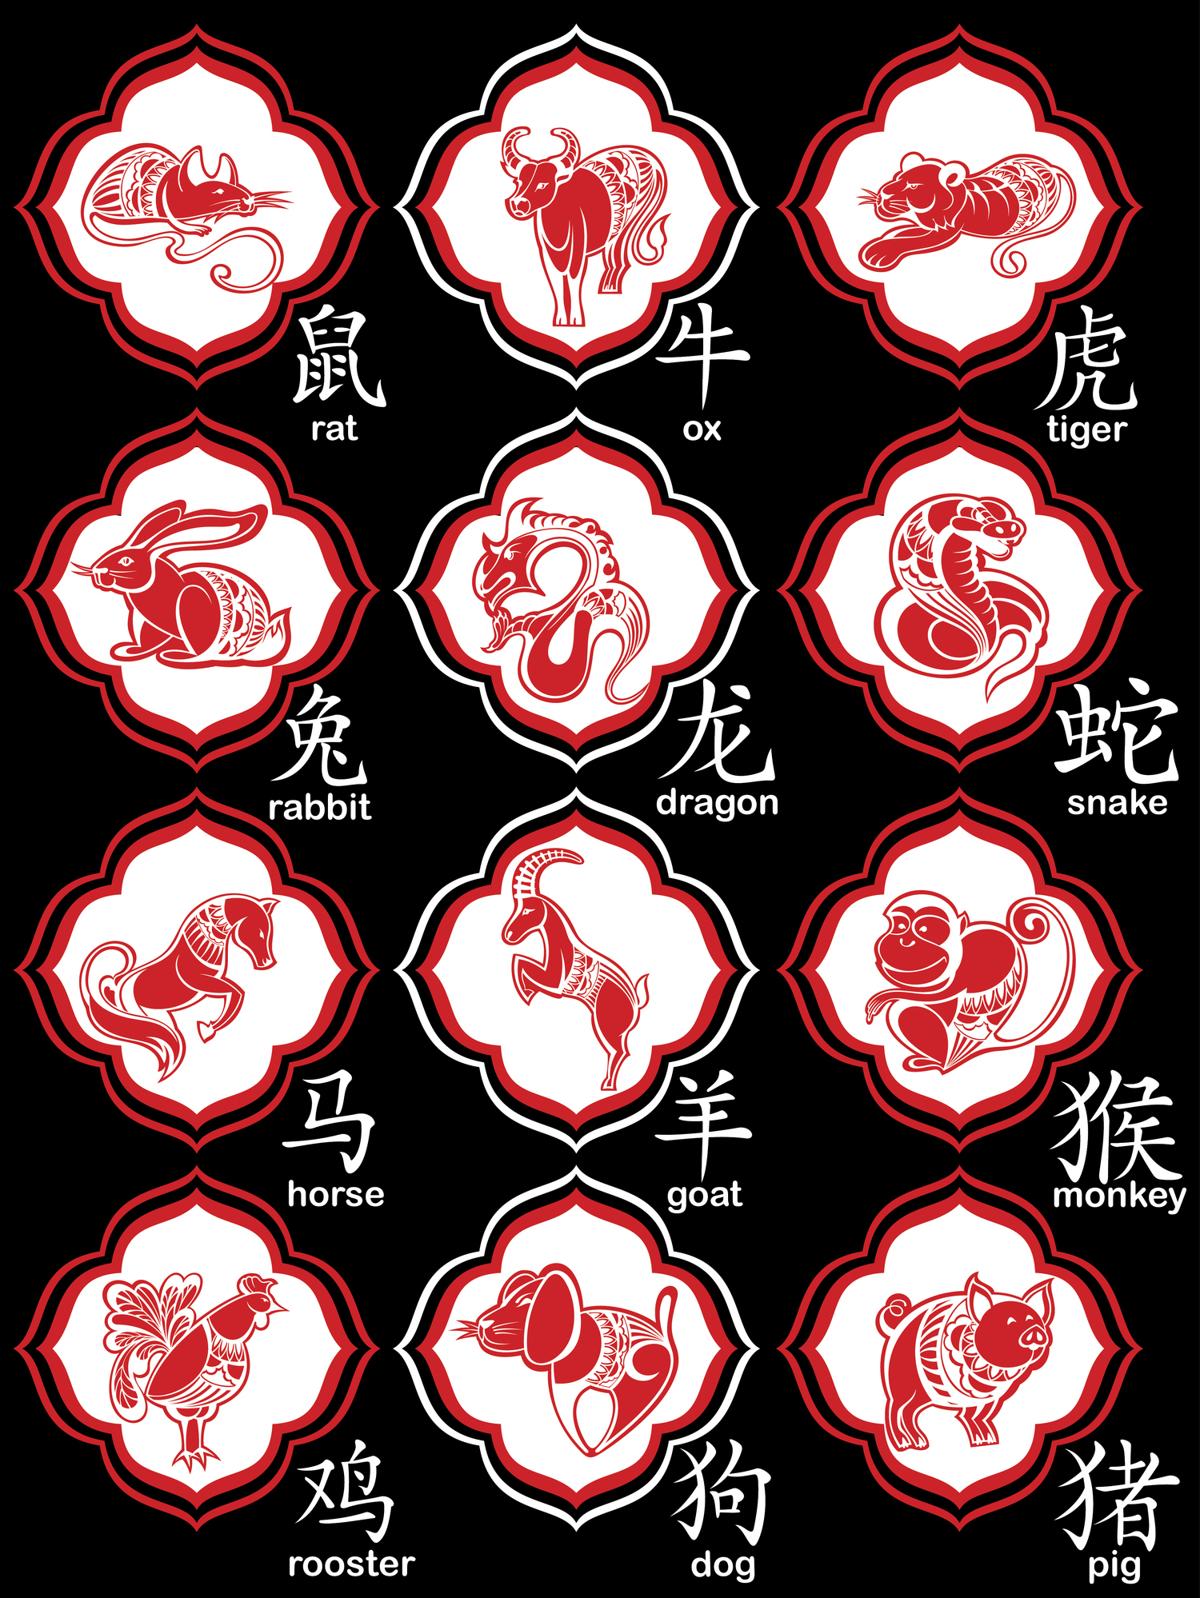 A Chart That Explains the Compatibility Between Chinese Zodiac Signs1200 x 1598